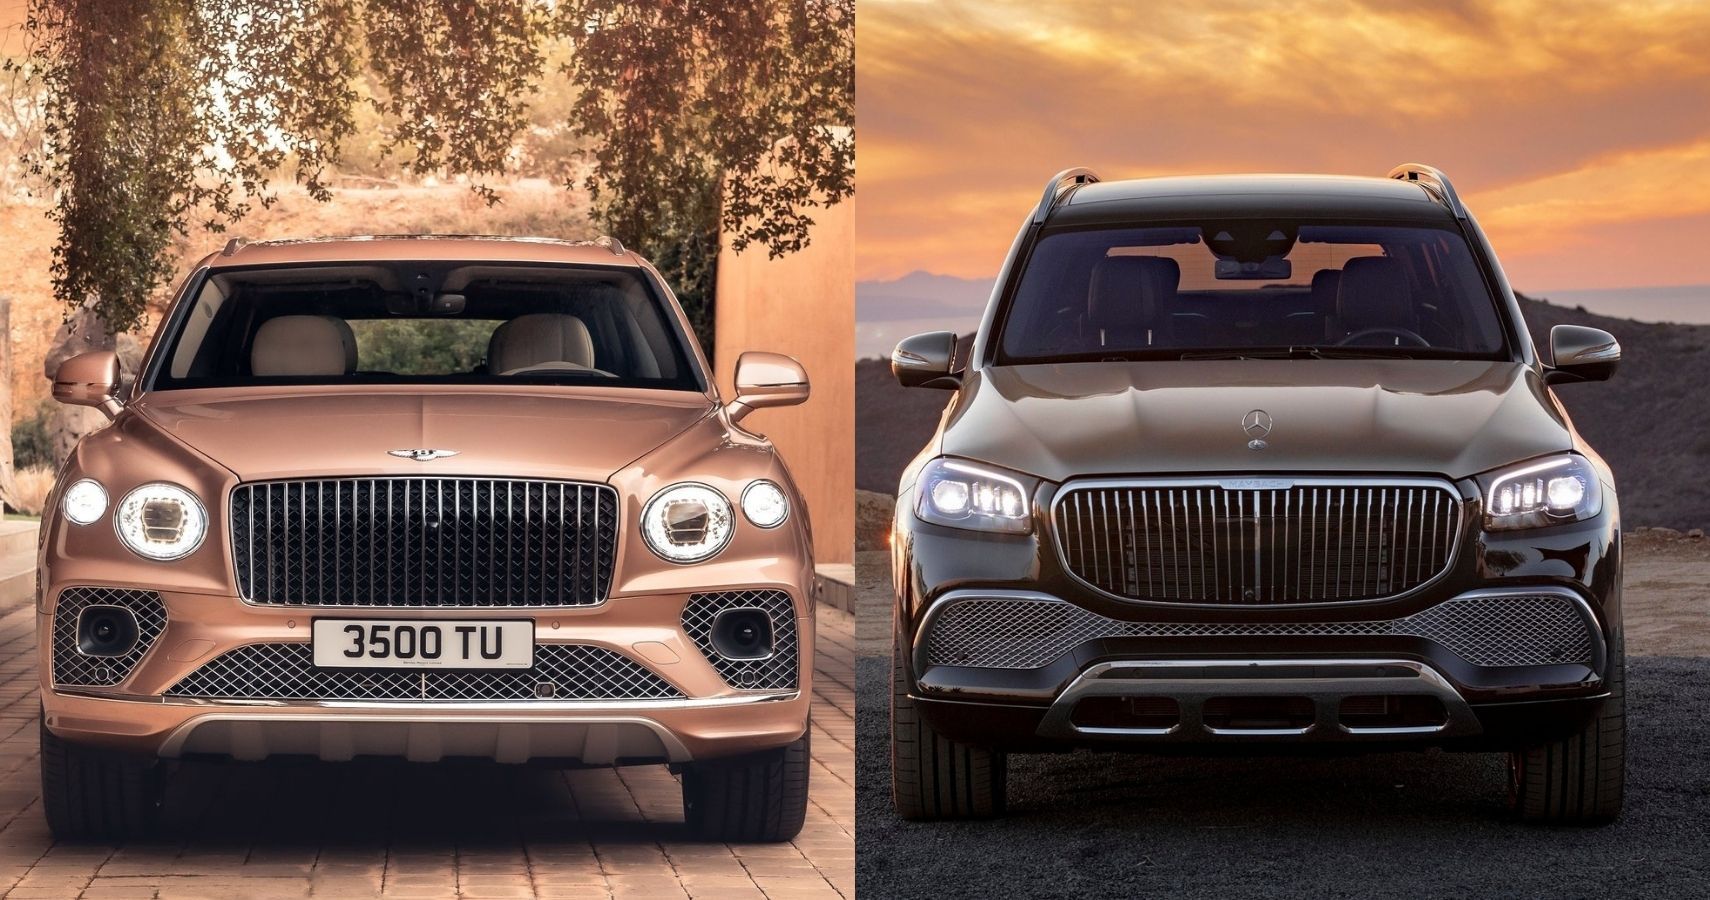 Bentley Bentayga EWB and Mercedes-Maybach GLS front view side-by-side comparison